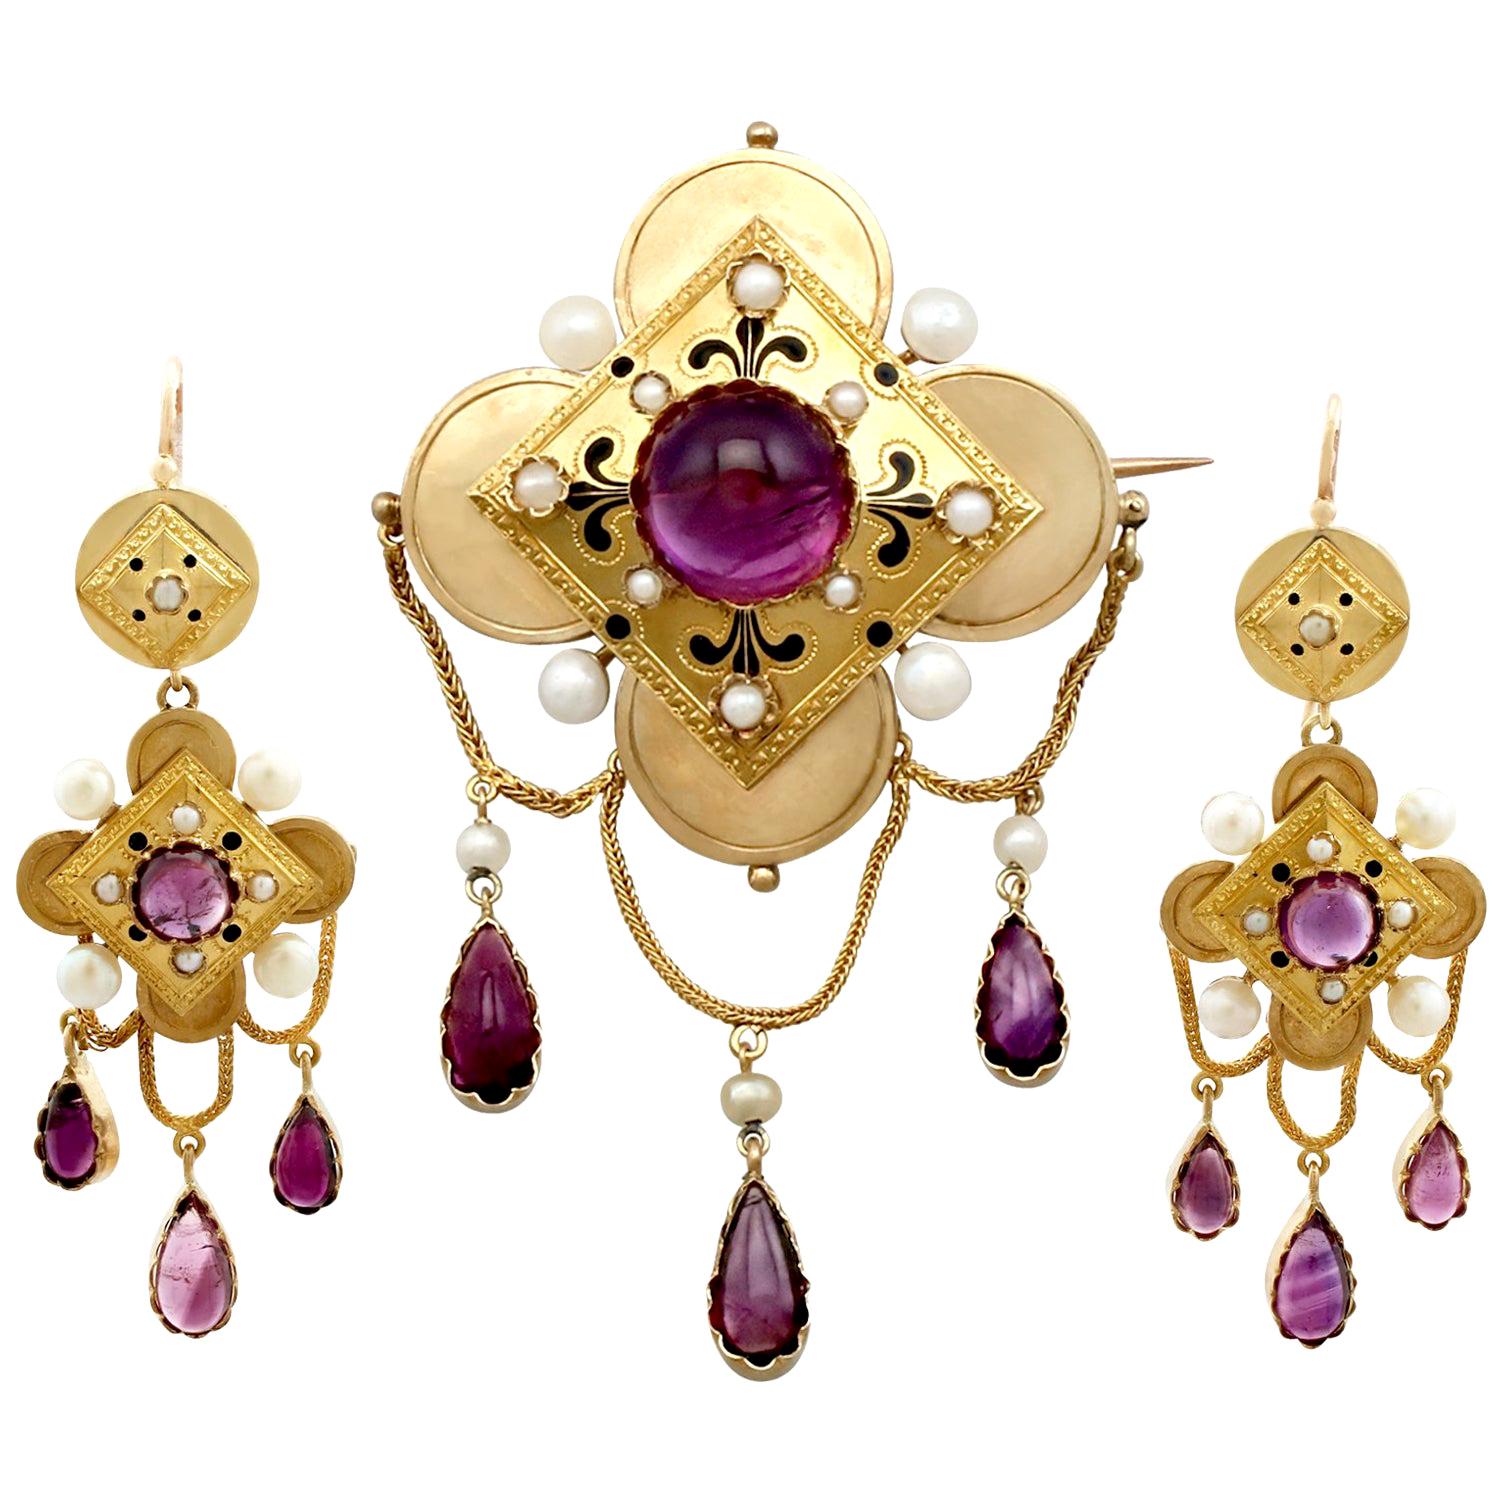 11.54 Carat Amethyst and Pearl Yellow Gold Jewelry Suite, Antique